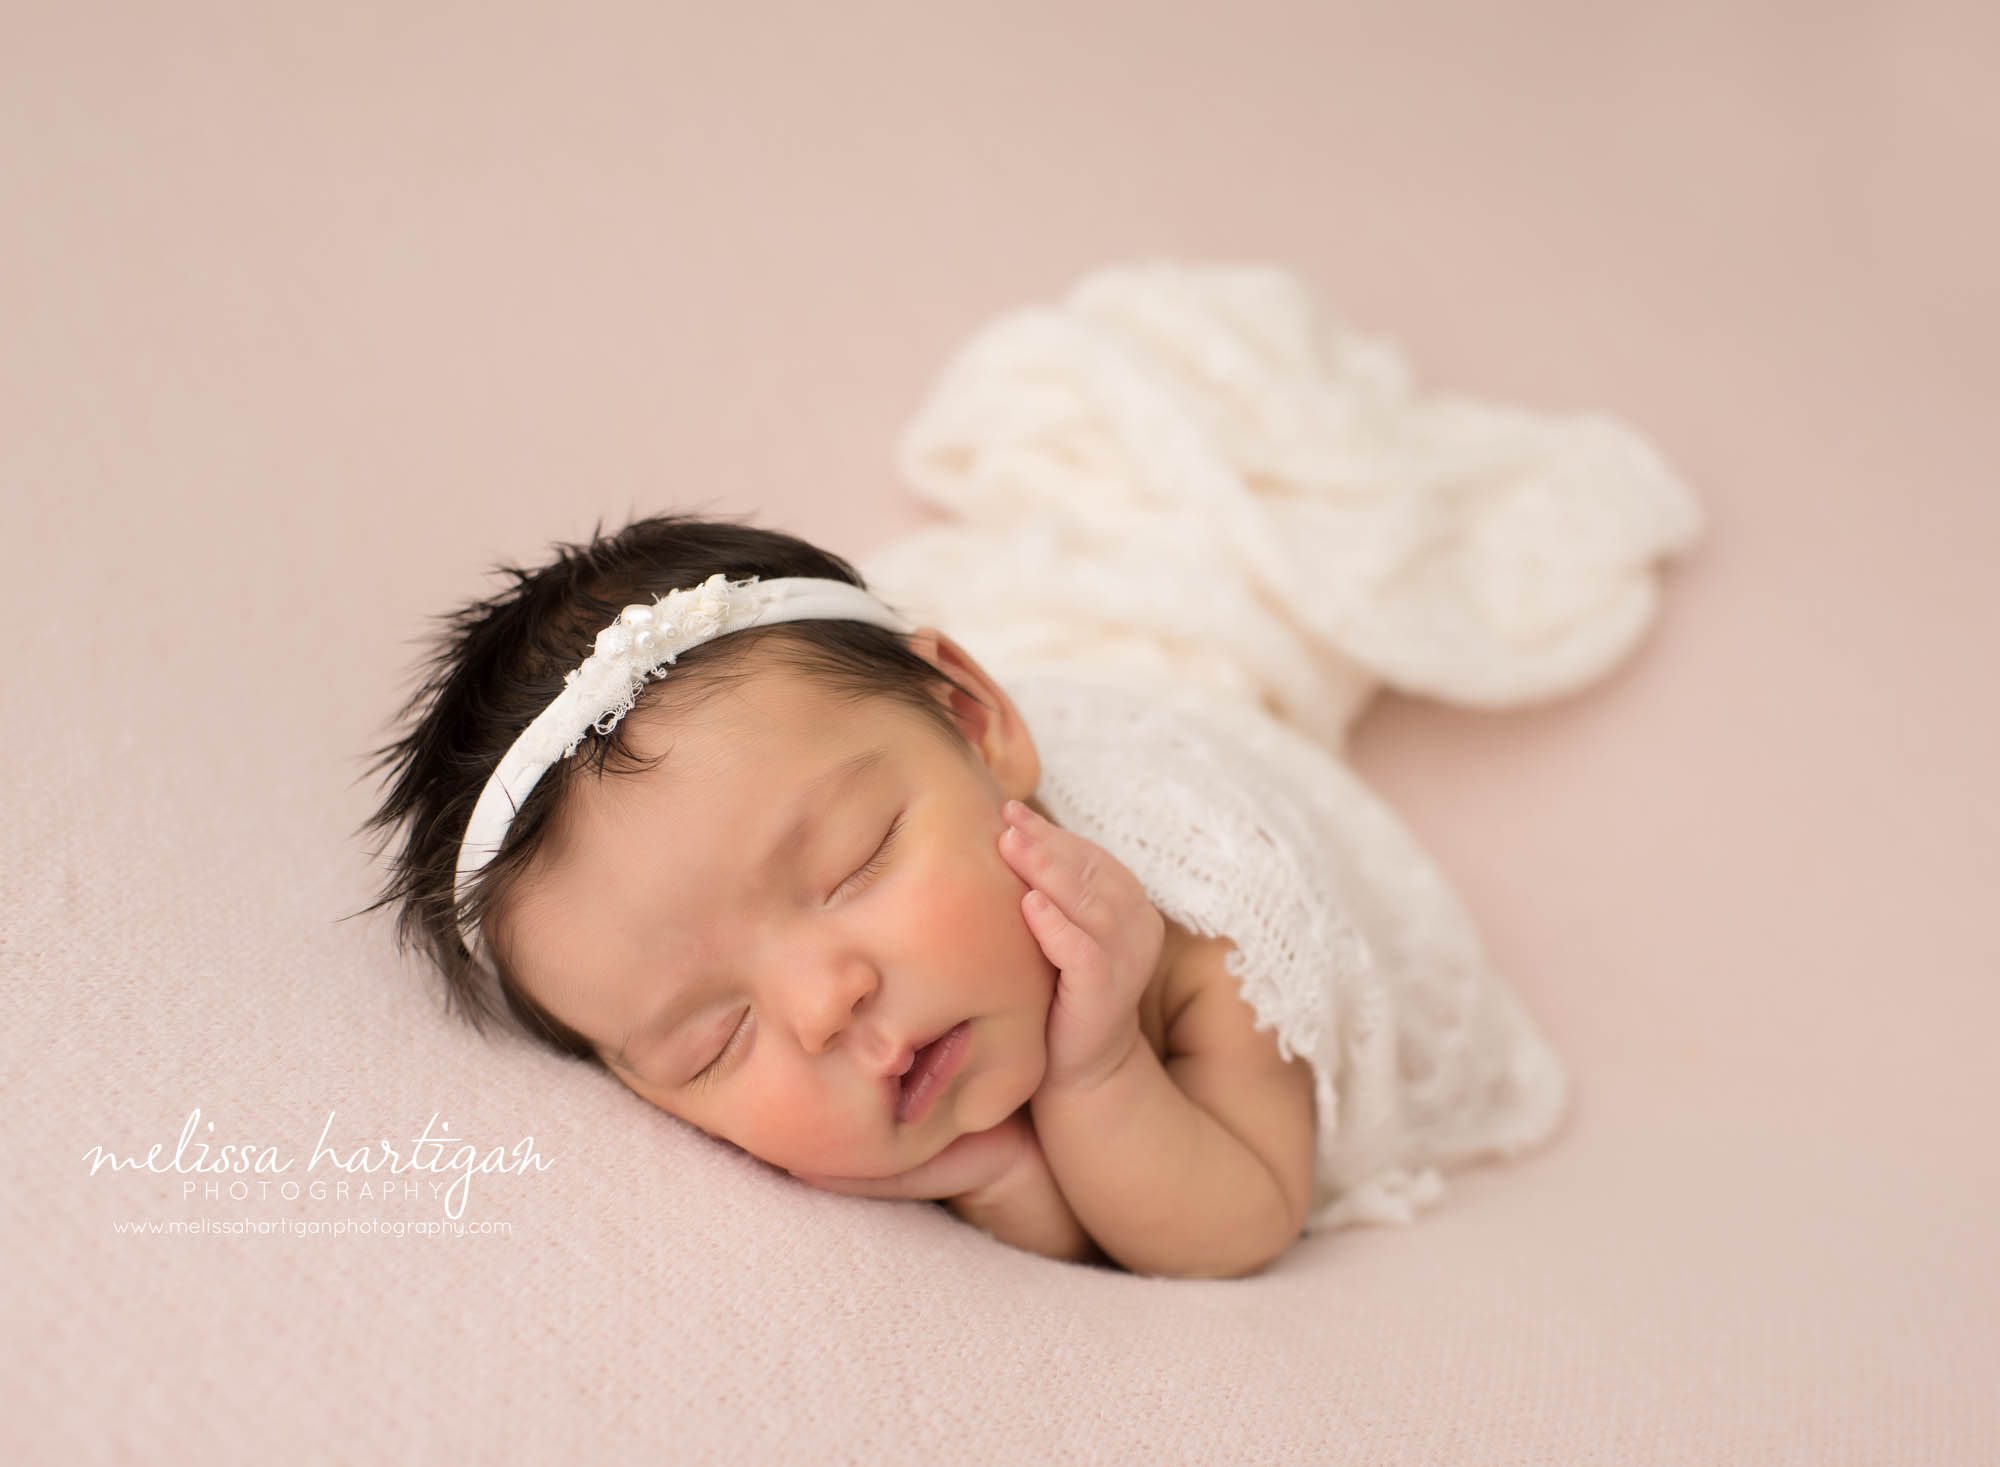 newborn baby girl posed on pink backdrop with cream layer draped over hear wearing headband newborn photography middletown